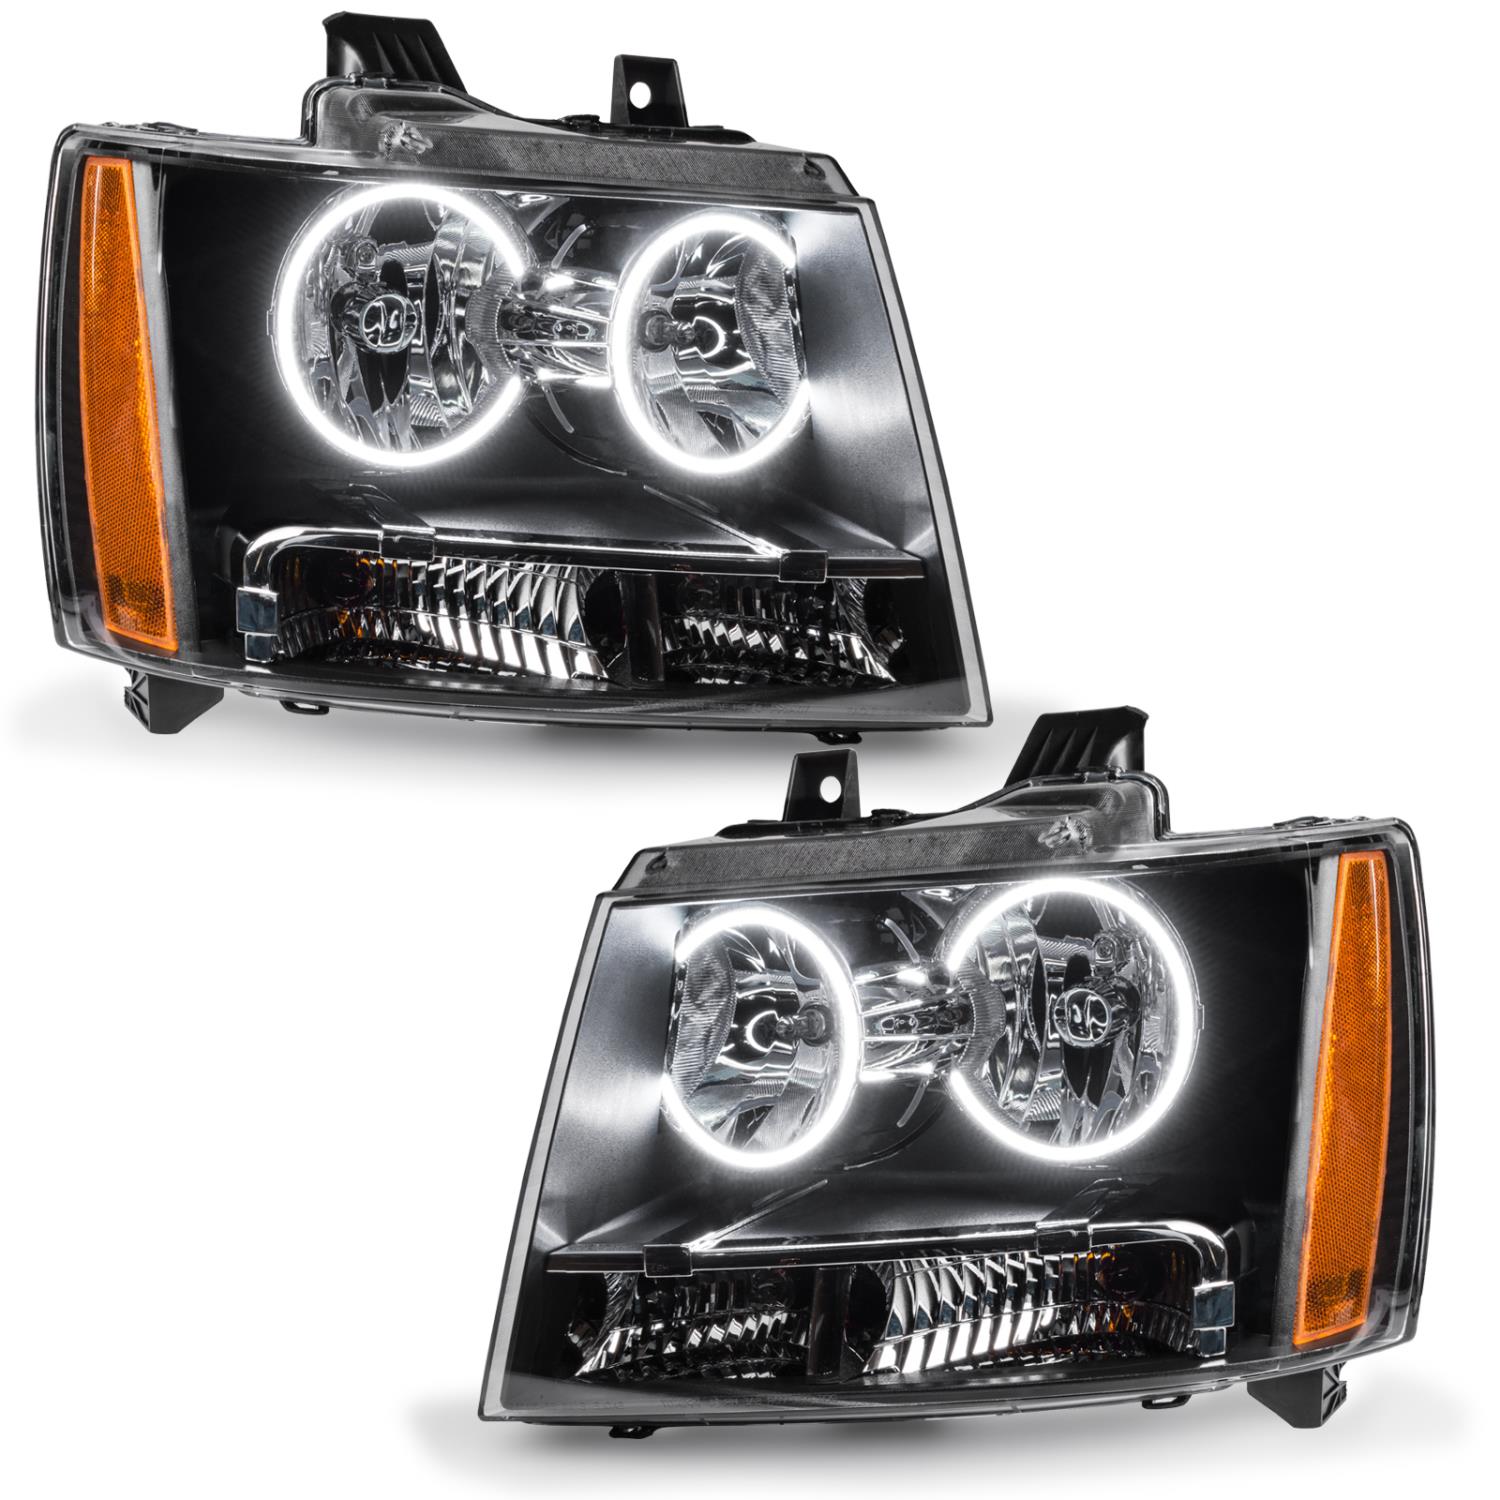 Plasma Halo Headlight Assemblies [Without Controller] for 2007-2013 Chevy Tahoe - White